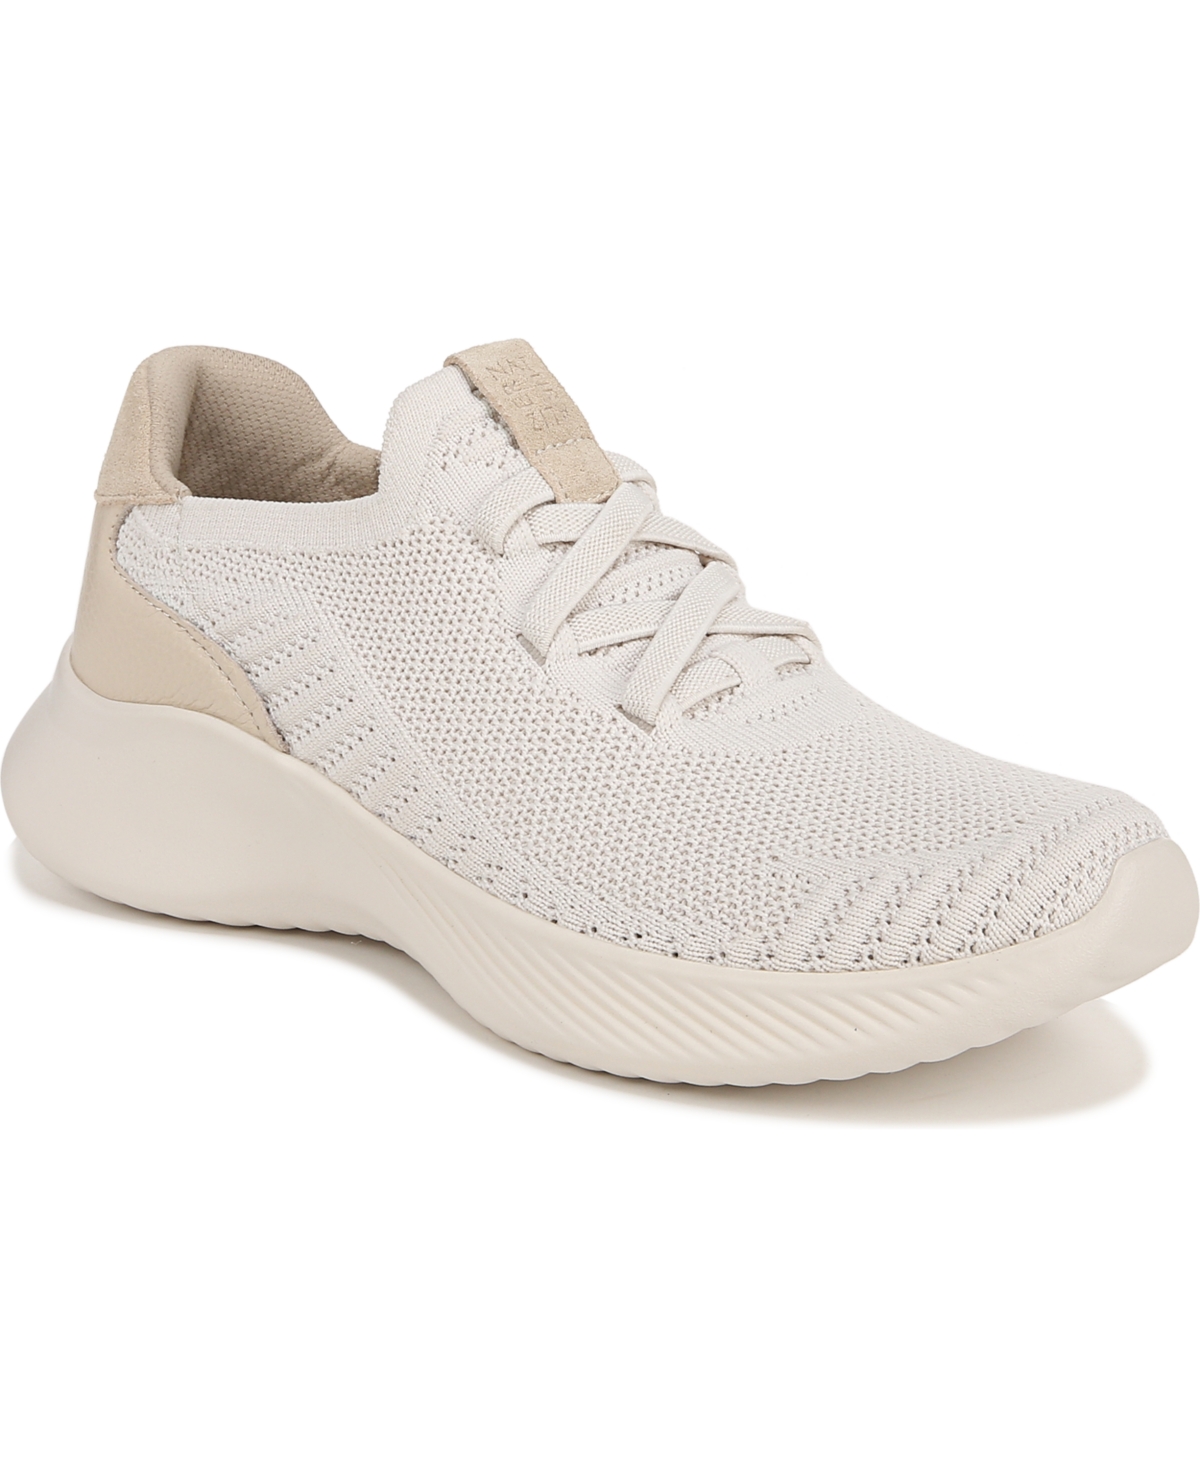 Shop Naturalizer Emerge Slip-on Sneakers In Porcelain Flyknit Fabric